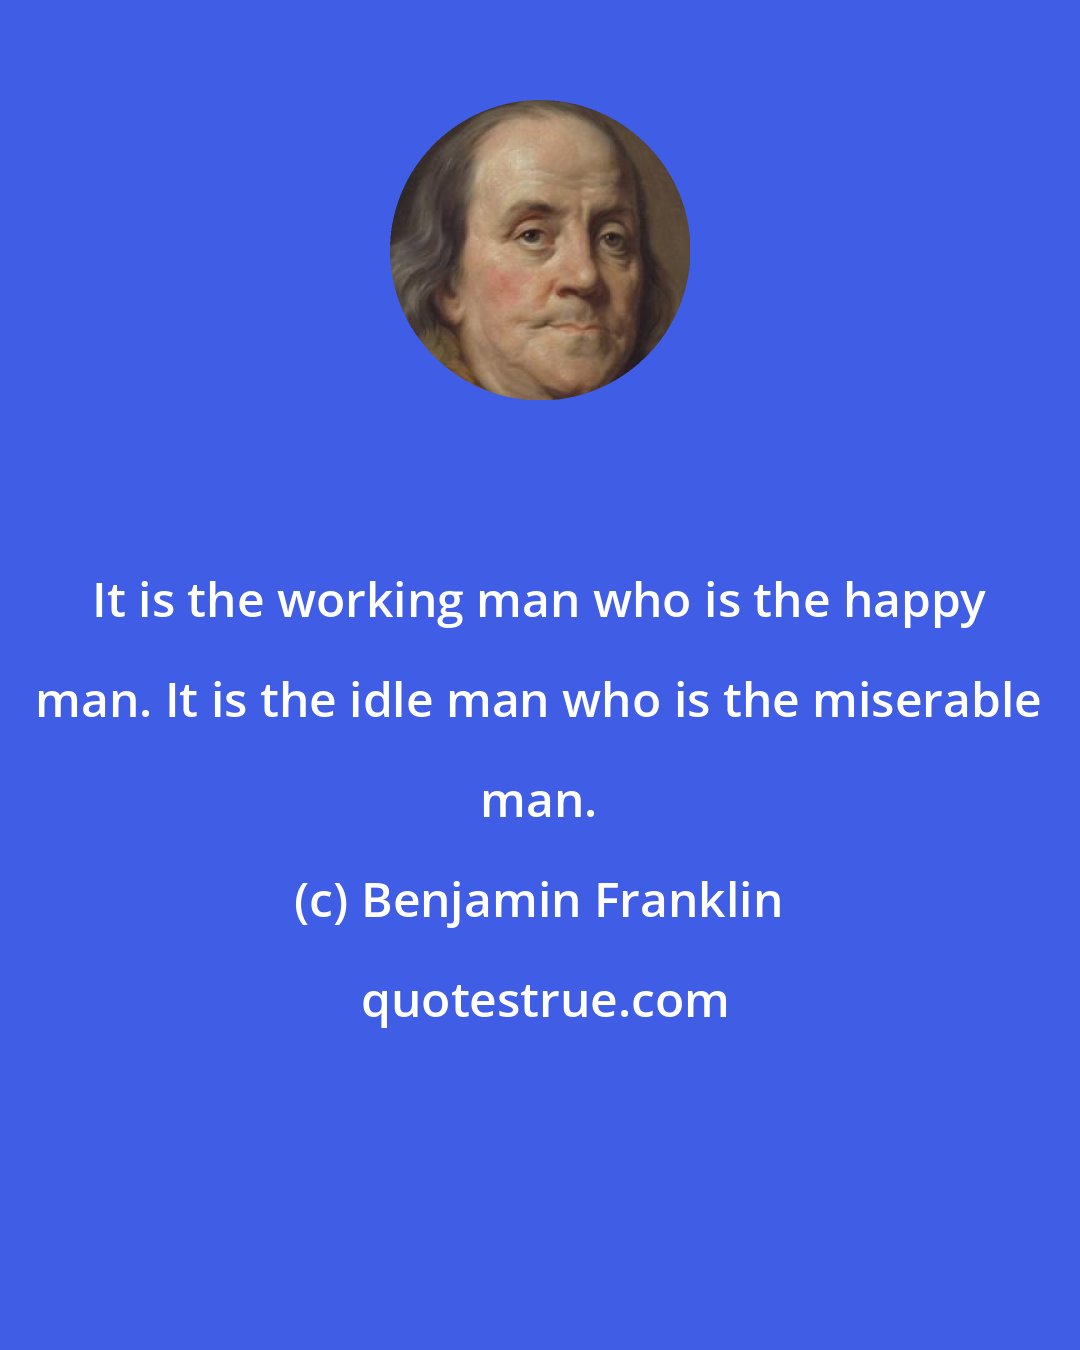 Benjamin Franklin: It is the working man who is the happy man. It is the idle man who is the miserable man.